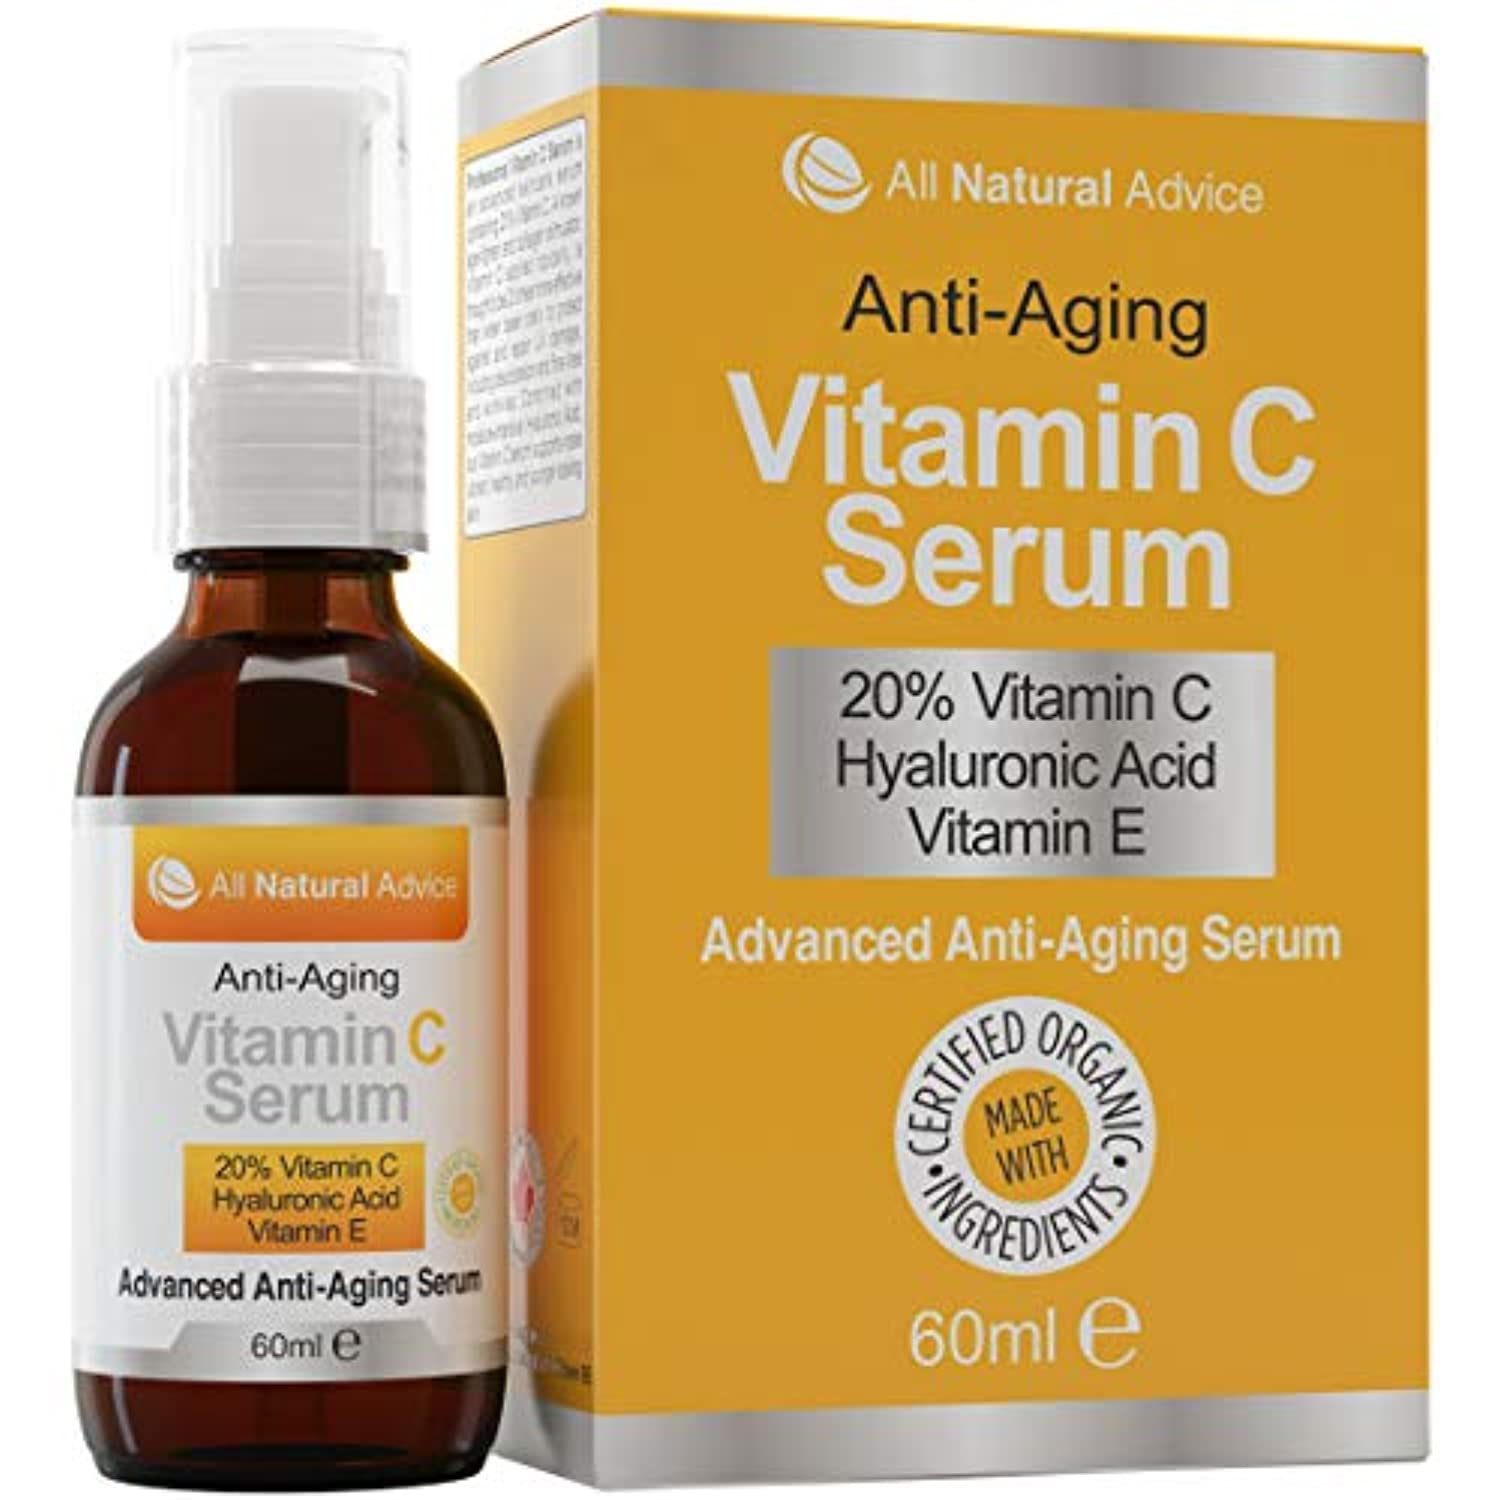 20% Vitamin C Serum - 60 ml / 2 oz Made in Canada - Certified Organic Ingredients + 11% Hyaluronic Acid + Vitamin E Moisturizer + Collagen Boost - Anti-Aging, while reducing Sun Spots, Wrinkles and Dark Circles, Excellent for Your Skin + Includes Pump & D